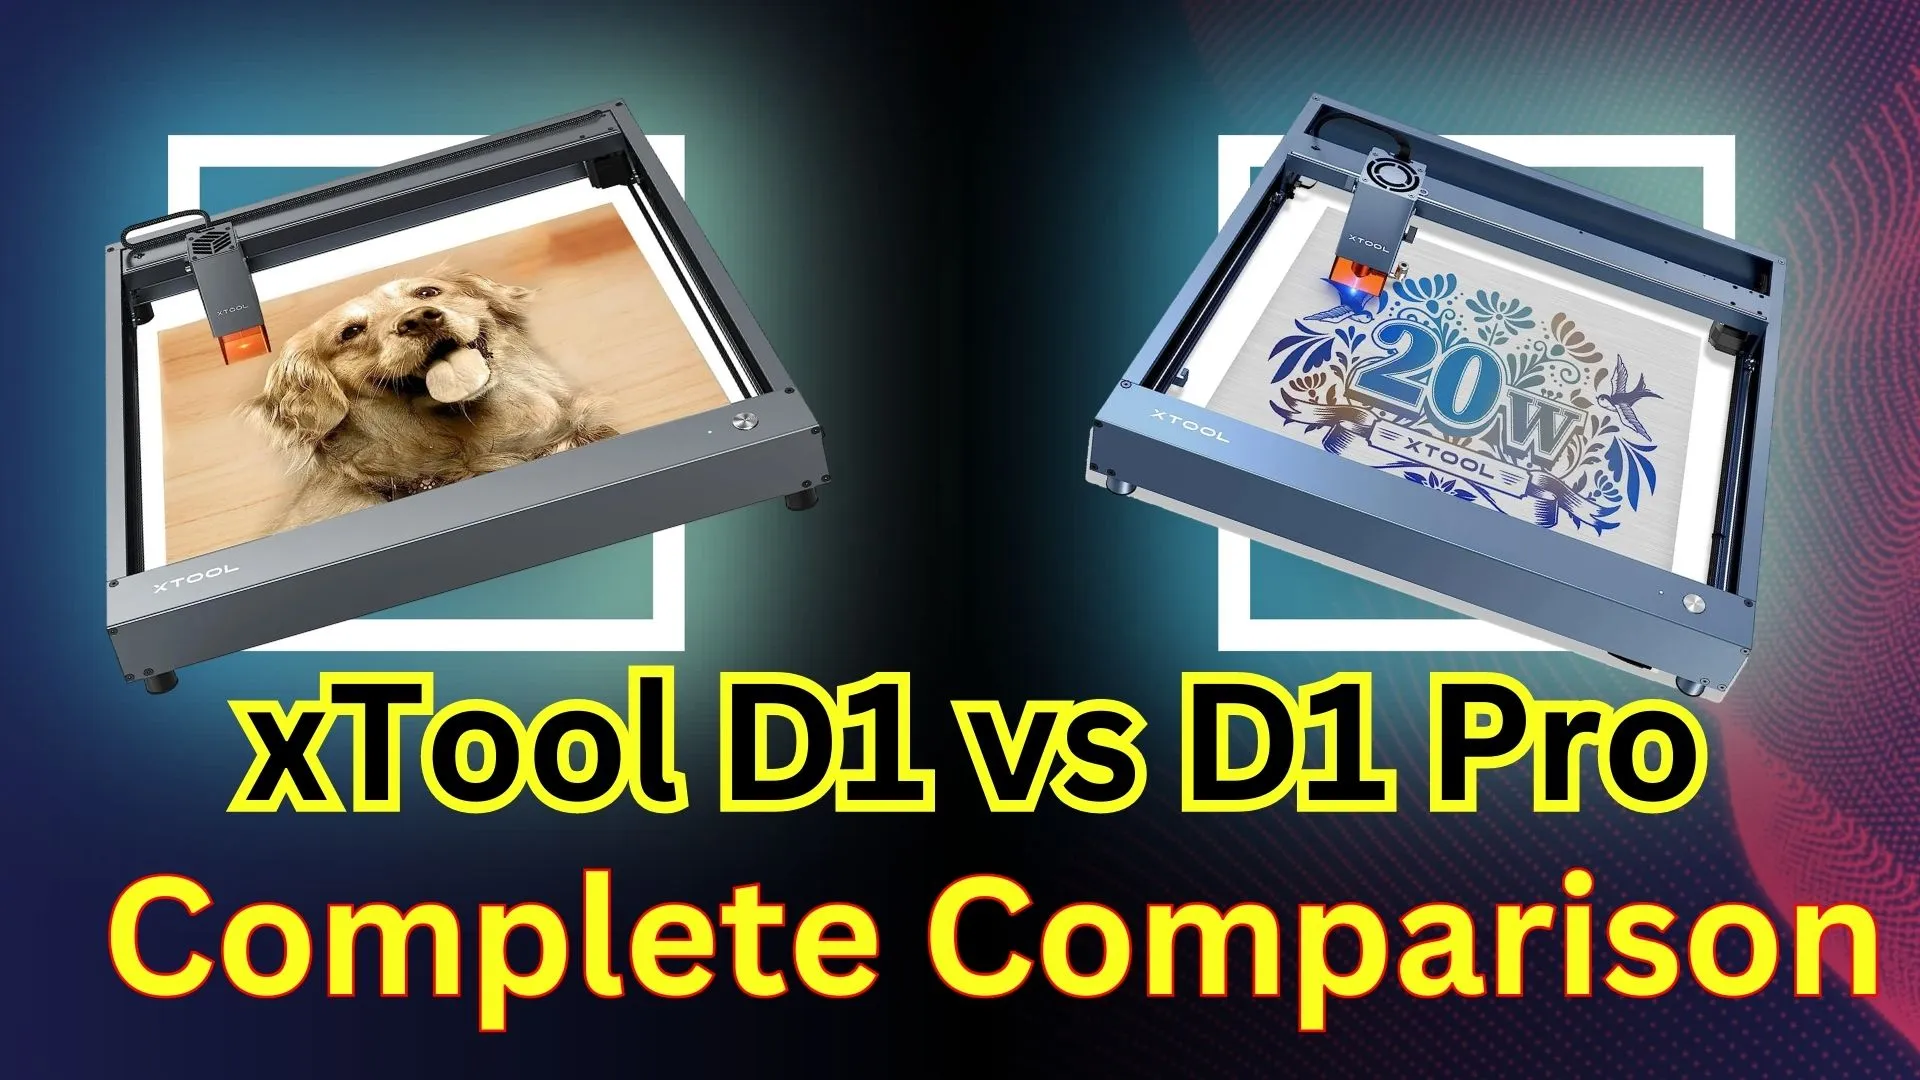 xTool D1 vs D1 Pro: Which Should You Purchase?